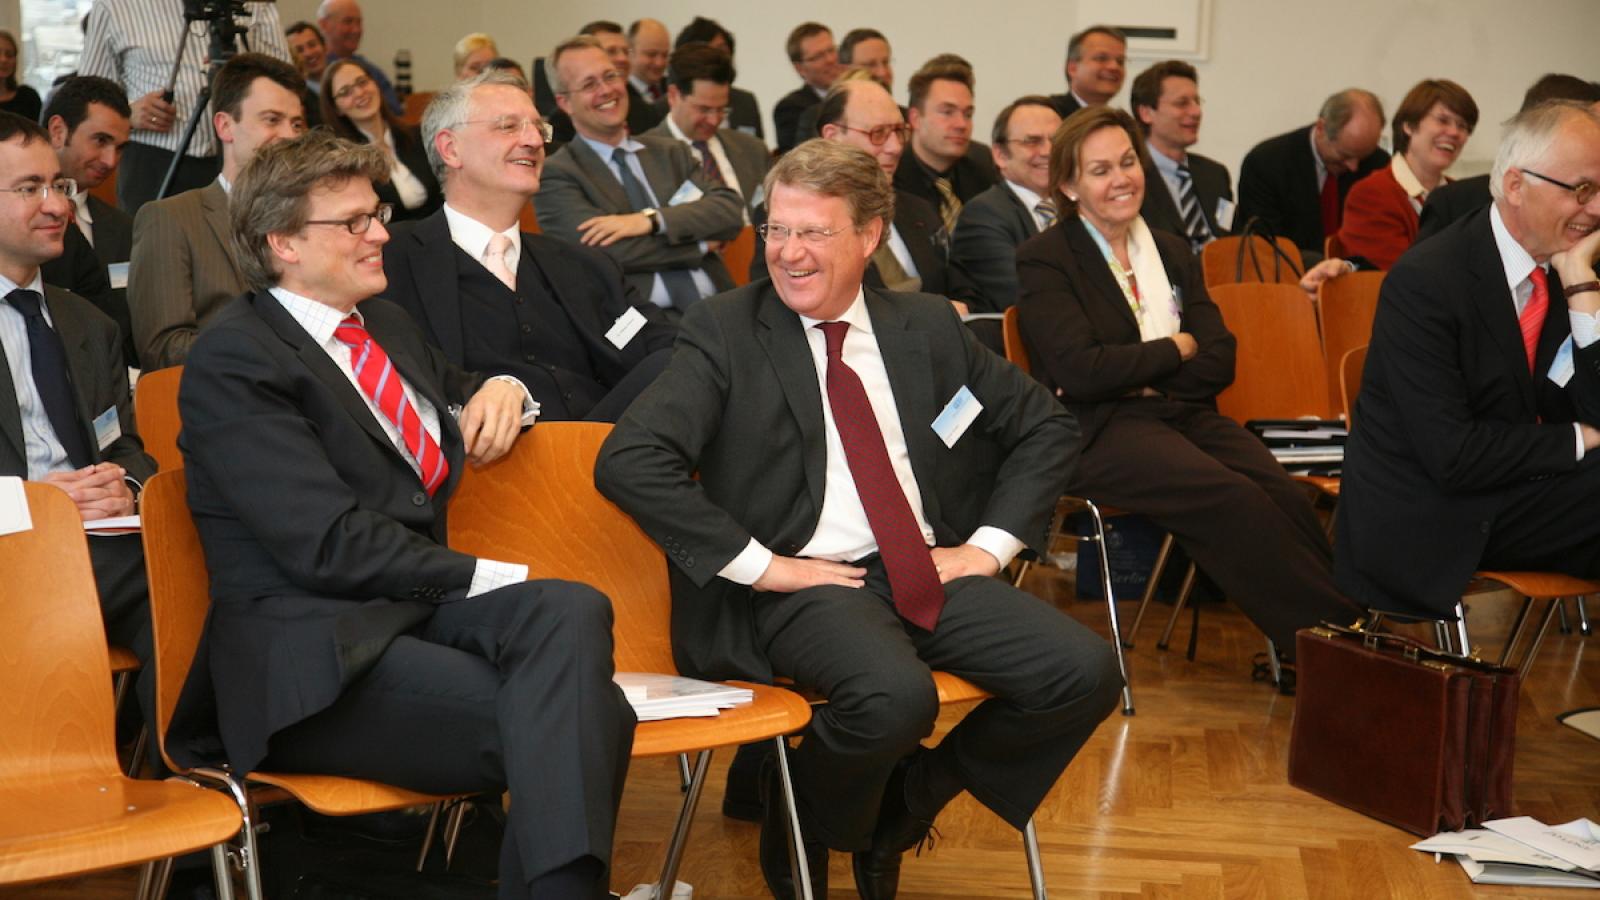 Attendees at a conference